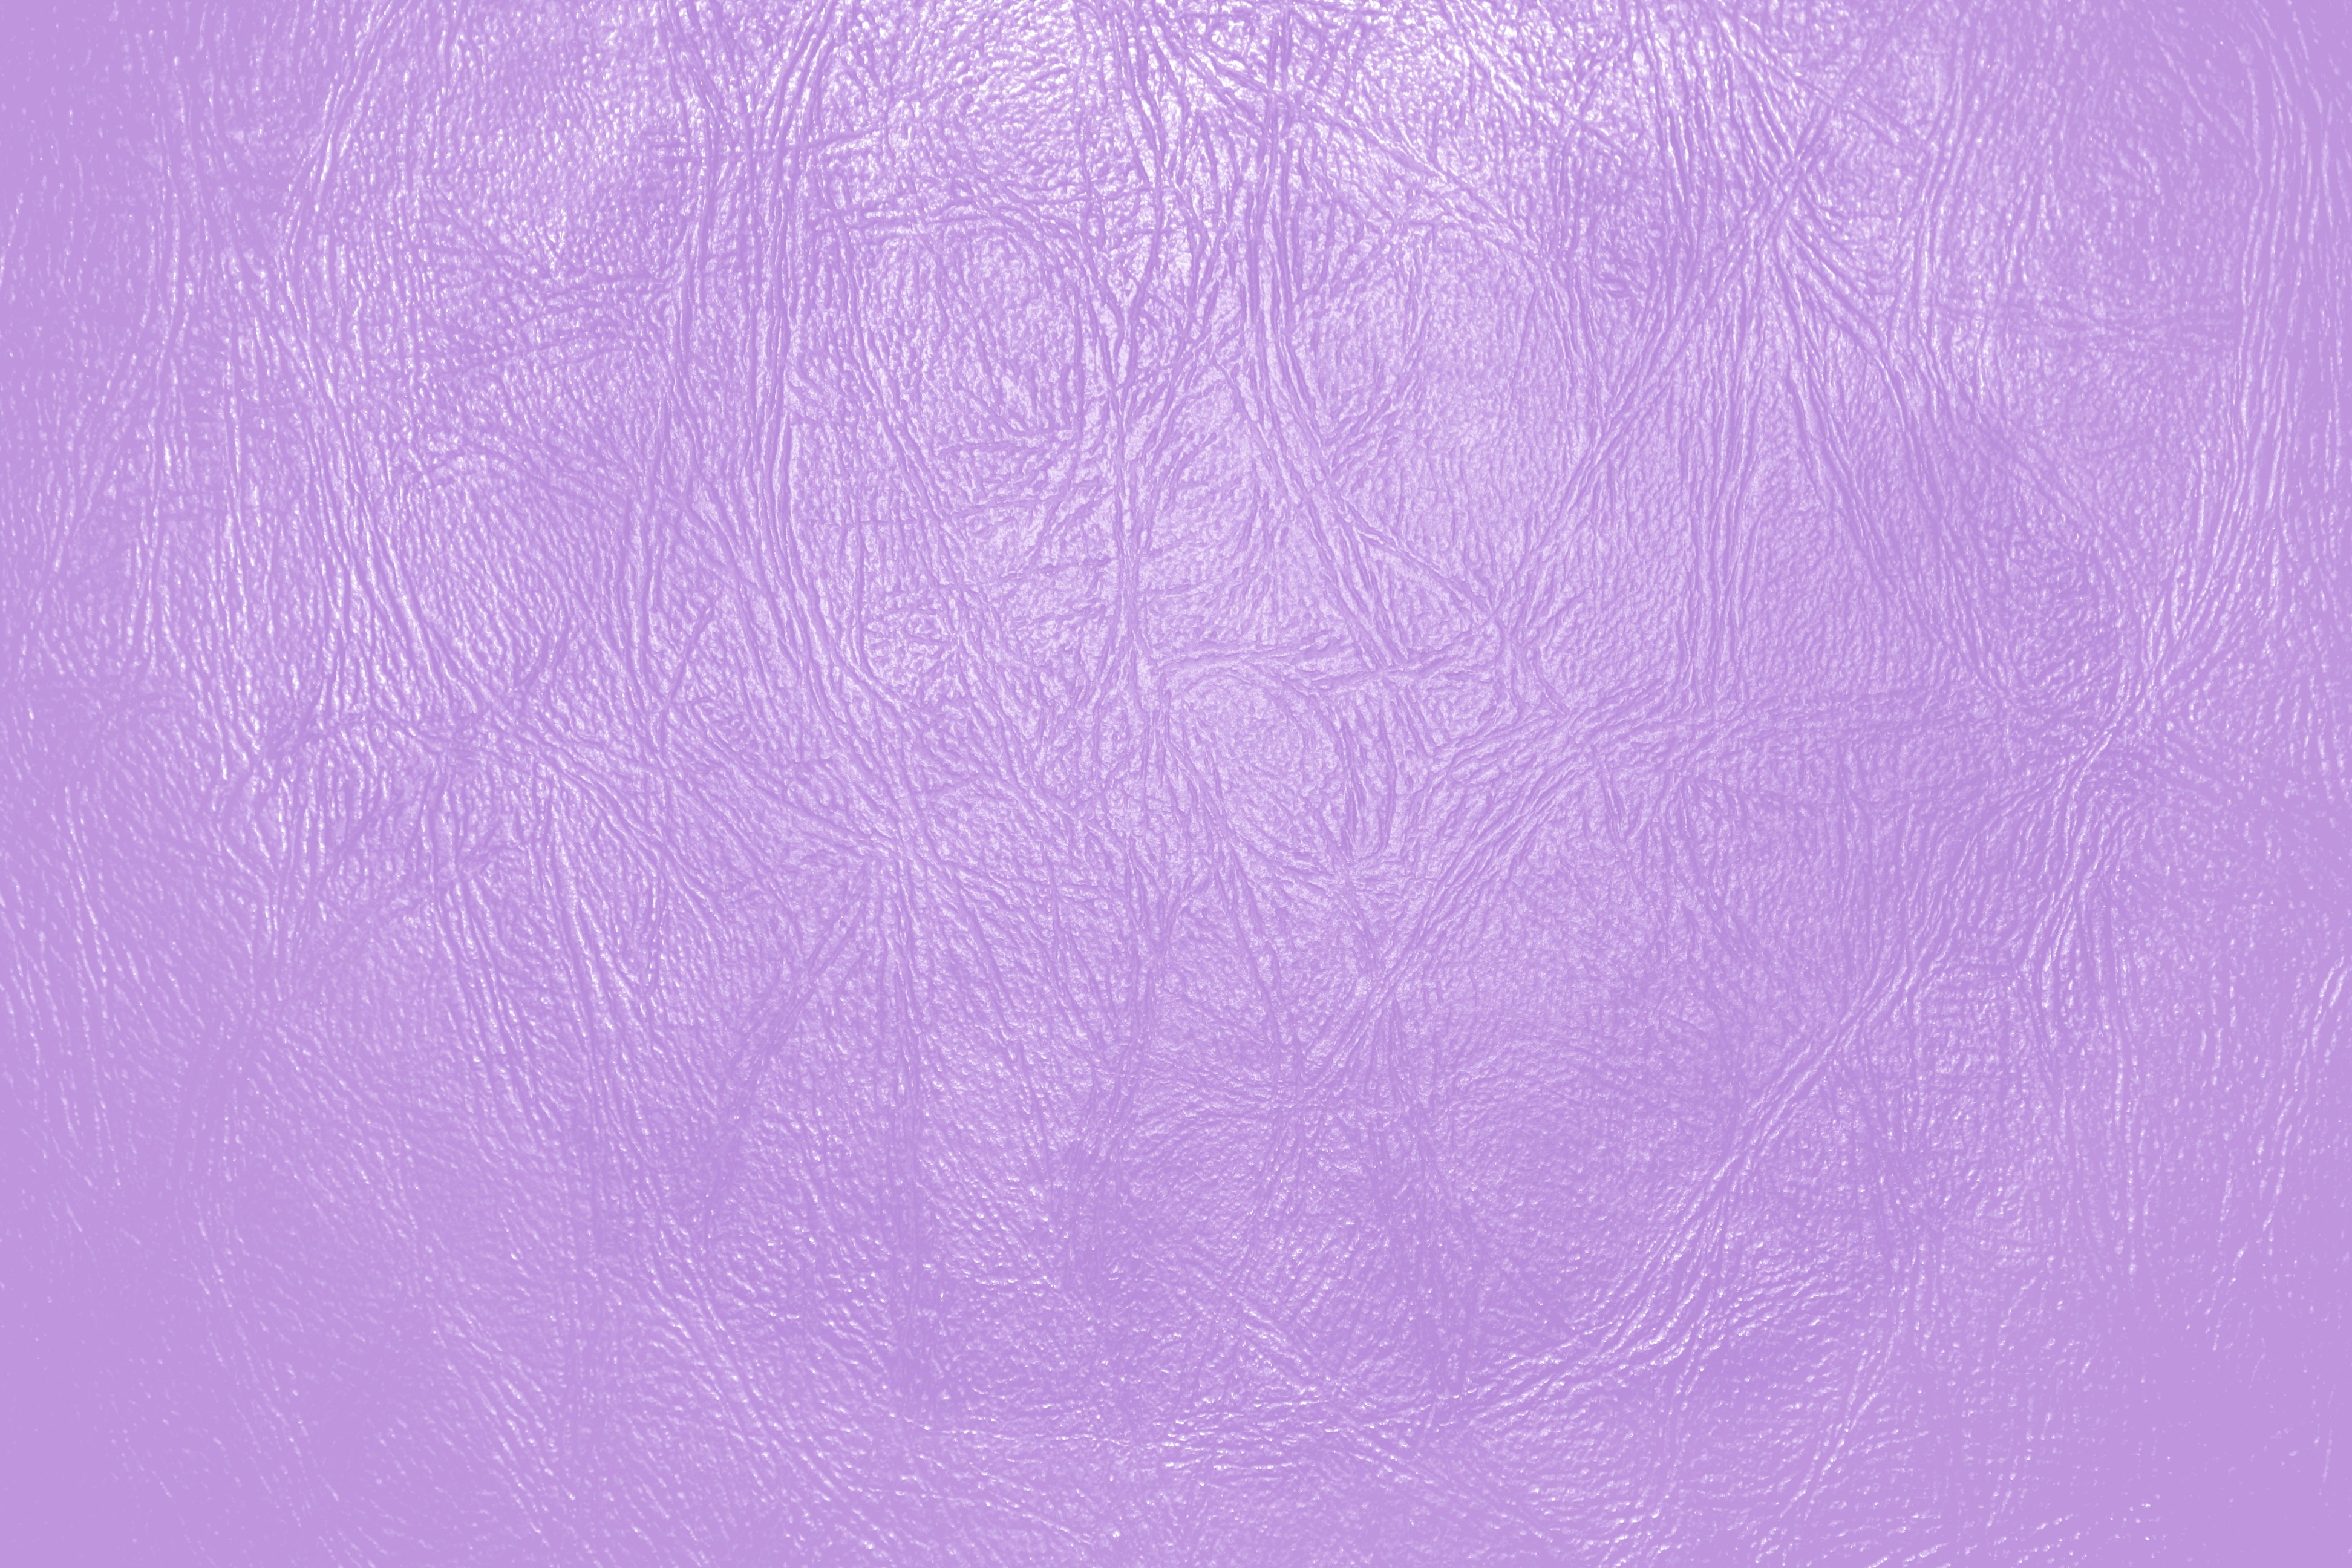 Lavender or Light Purple Leather Close Up Texture Picture Free